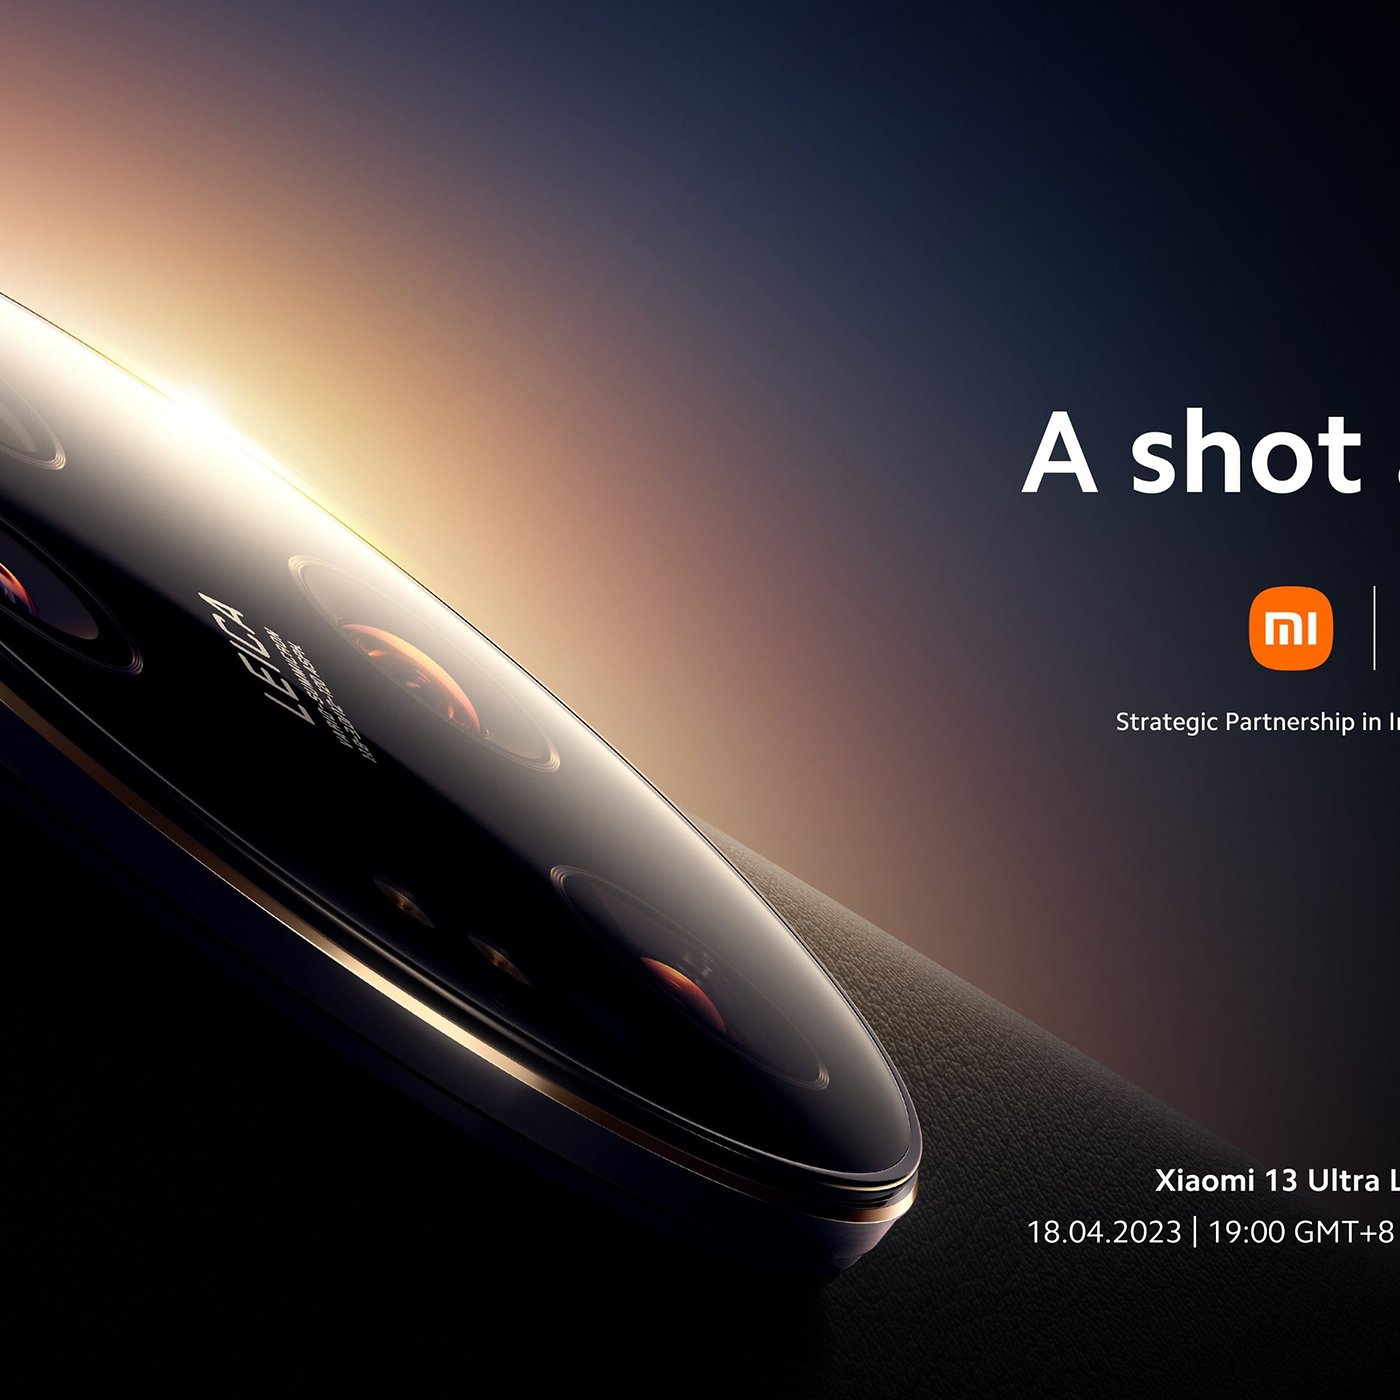 Xiaomi 13 Ultra will be Available in the Global Market, says Company's CEO  - WhatMobile news